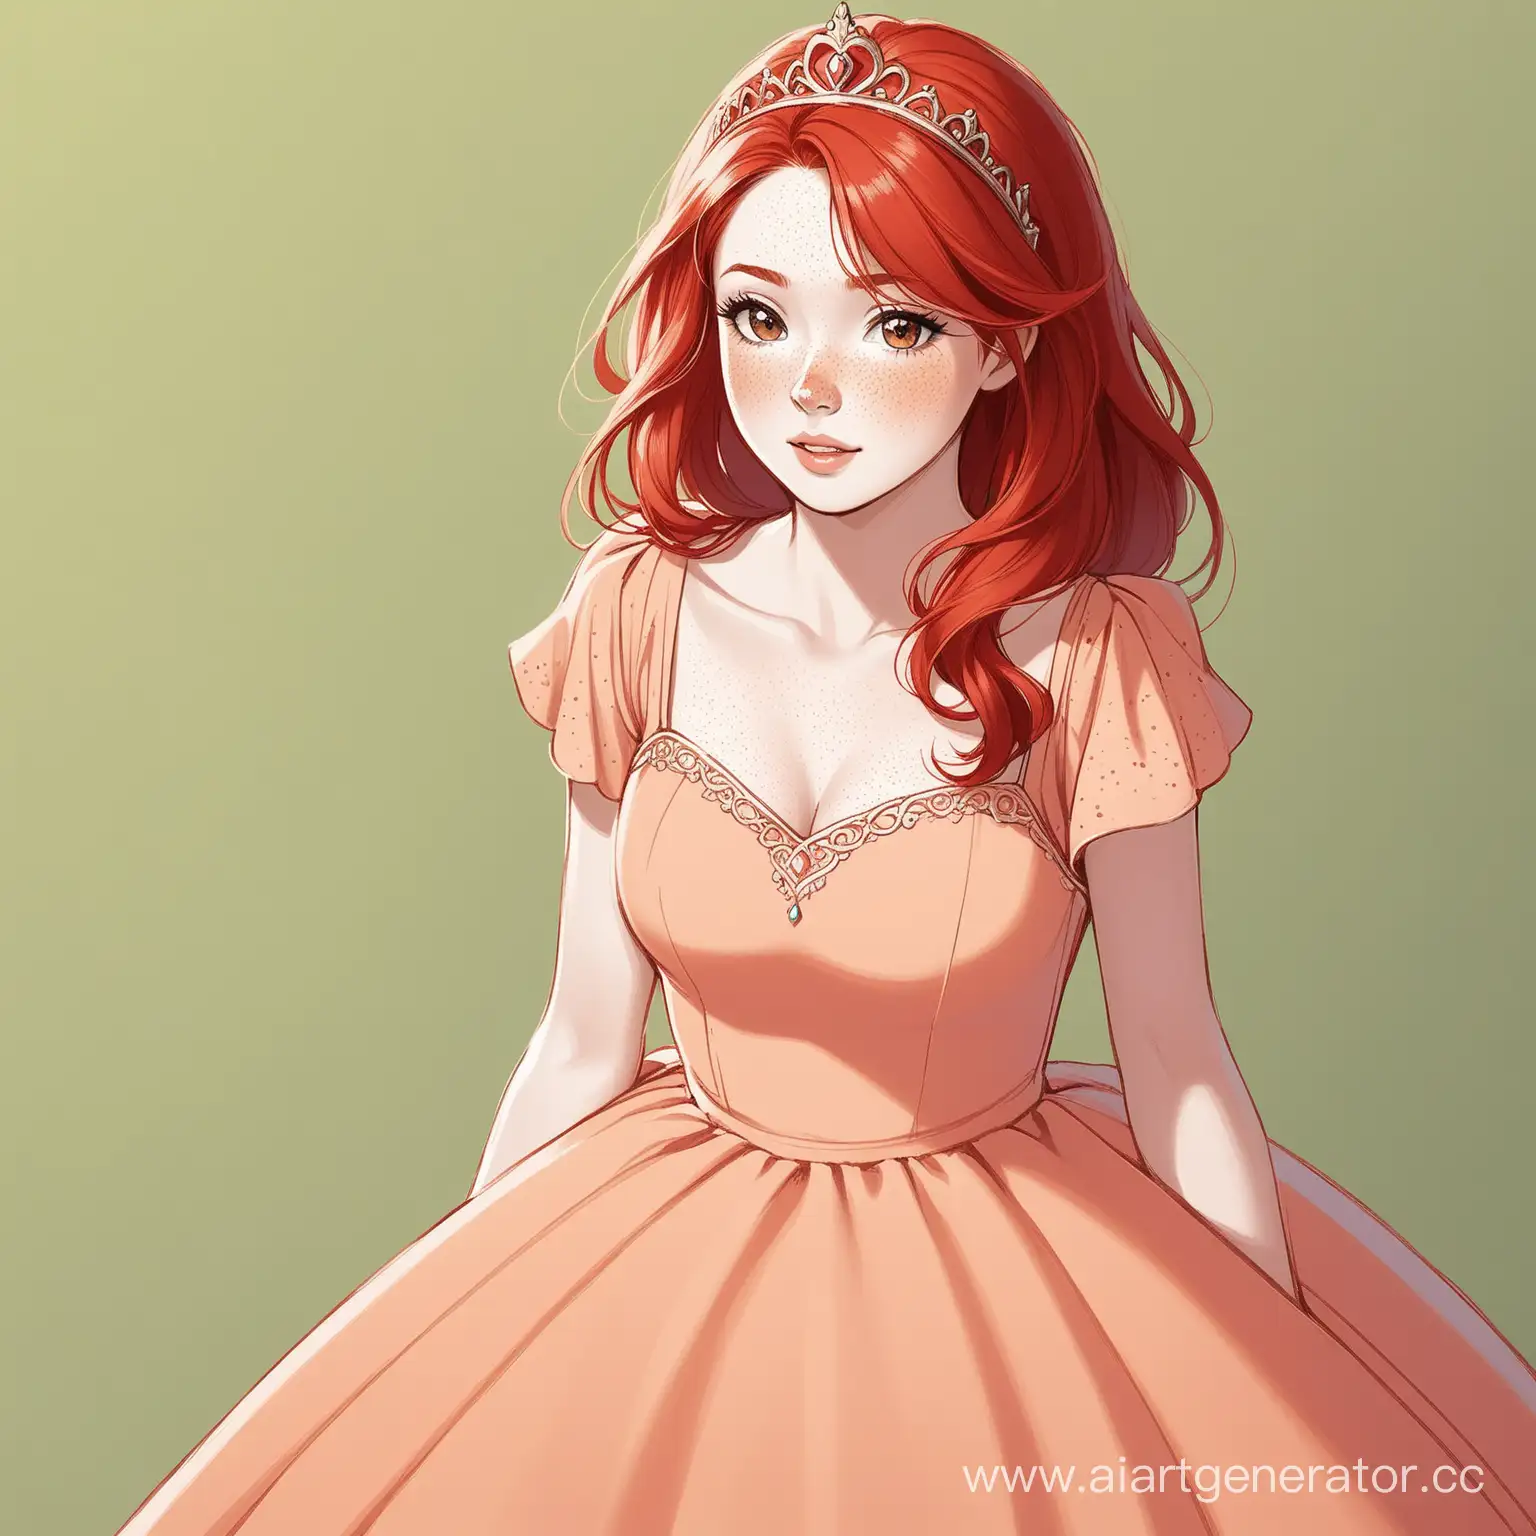 RedHaired-Princess-in-Peach-Dress-with-Freckles